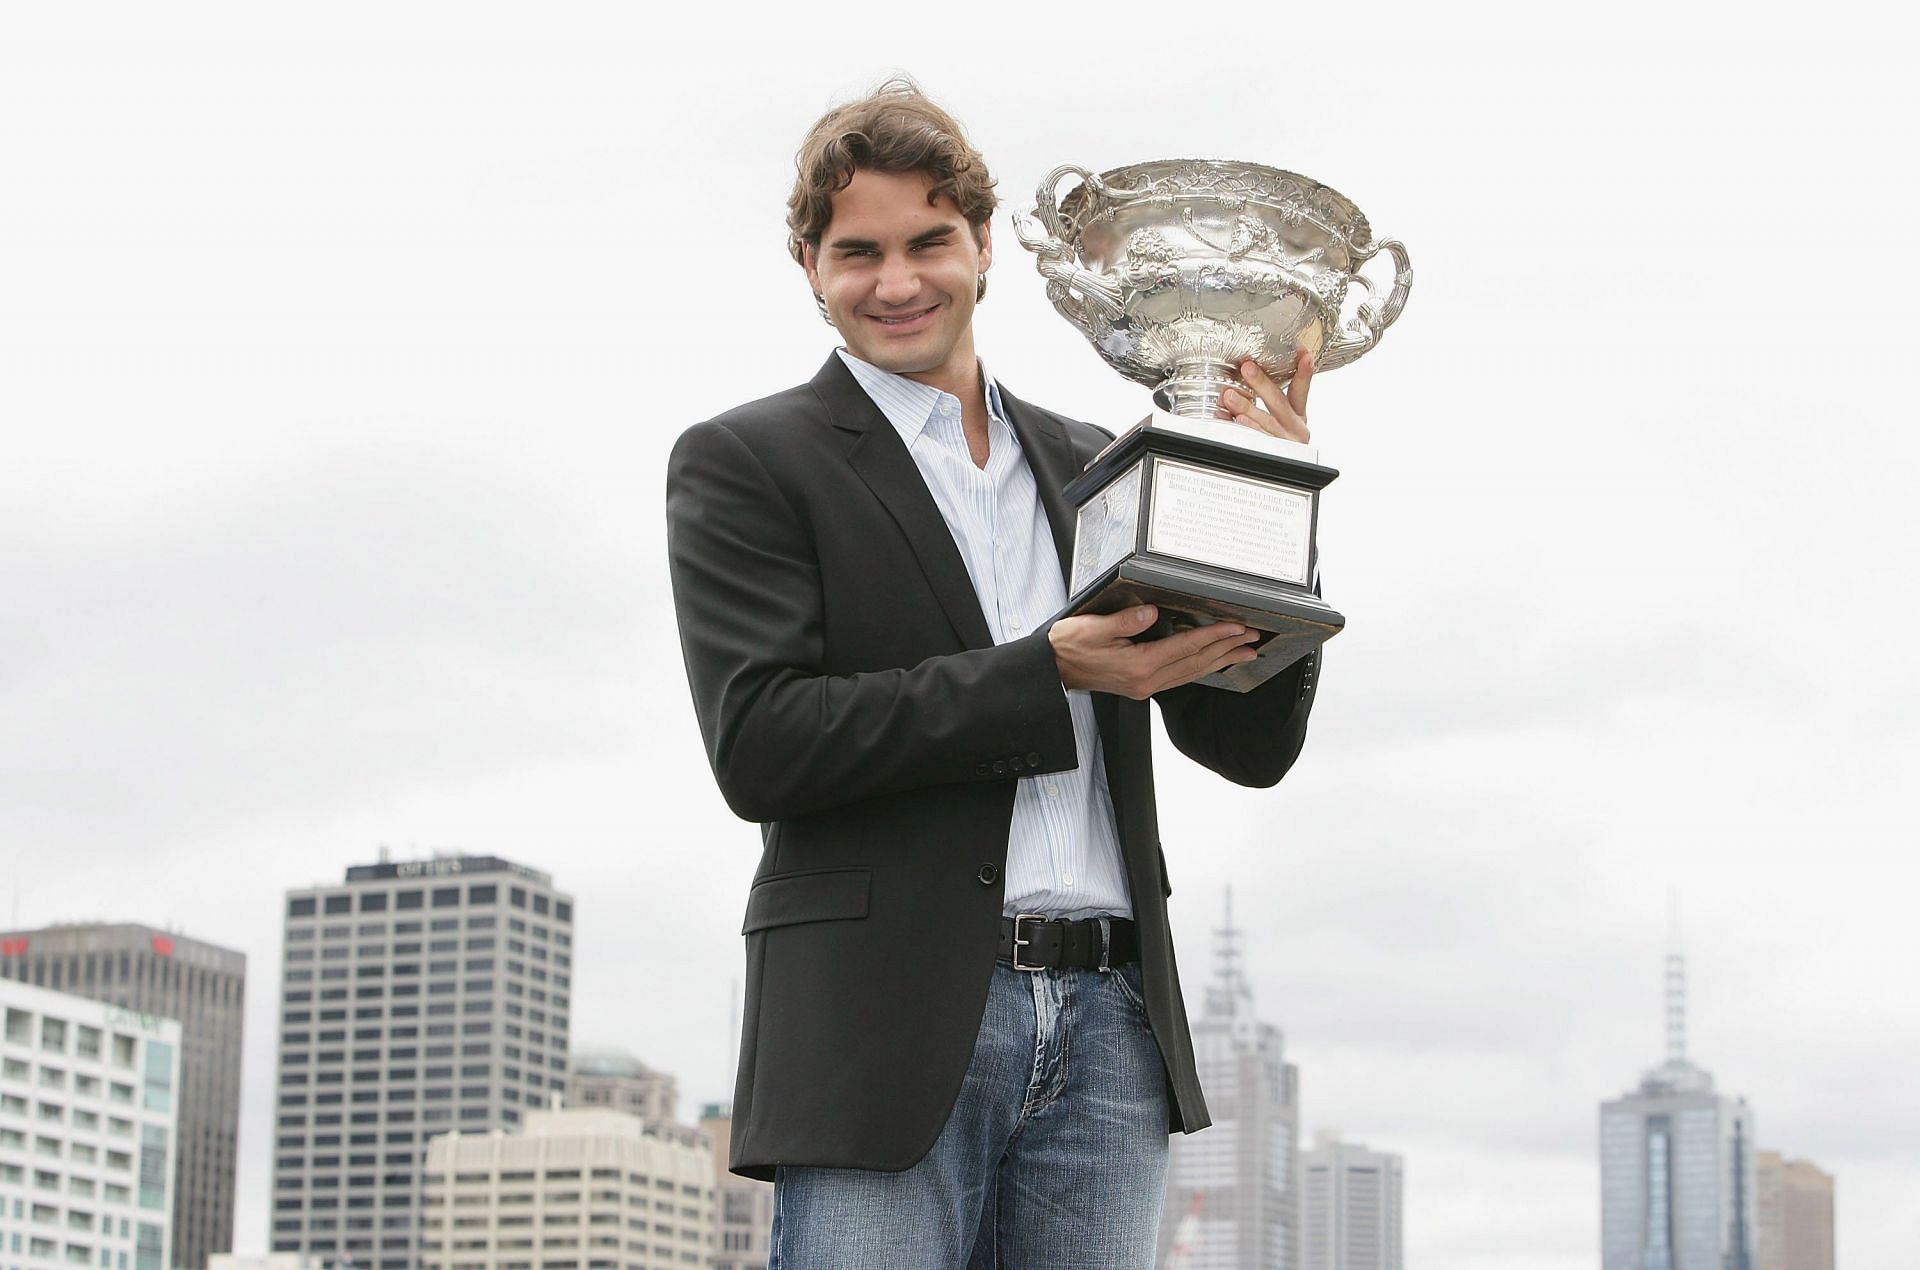 Beginning with the 2004 Australian Open, the Swiss maestro won 11 of the next 16 Grand Slams